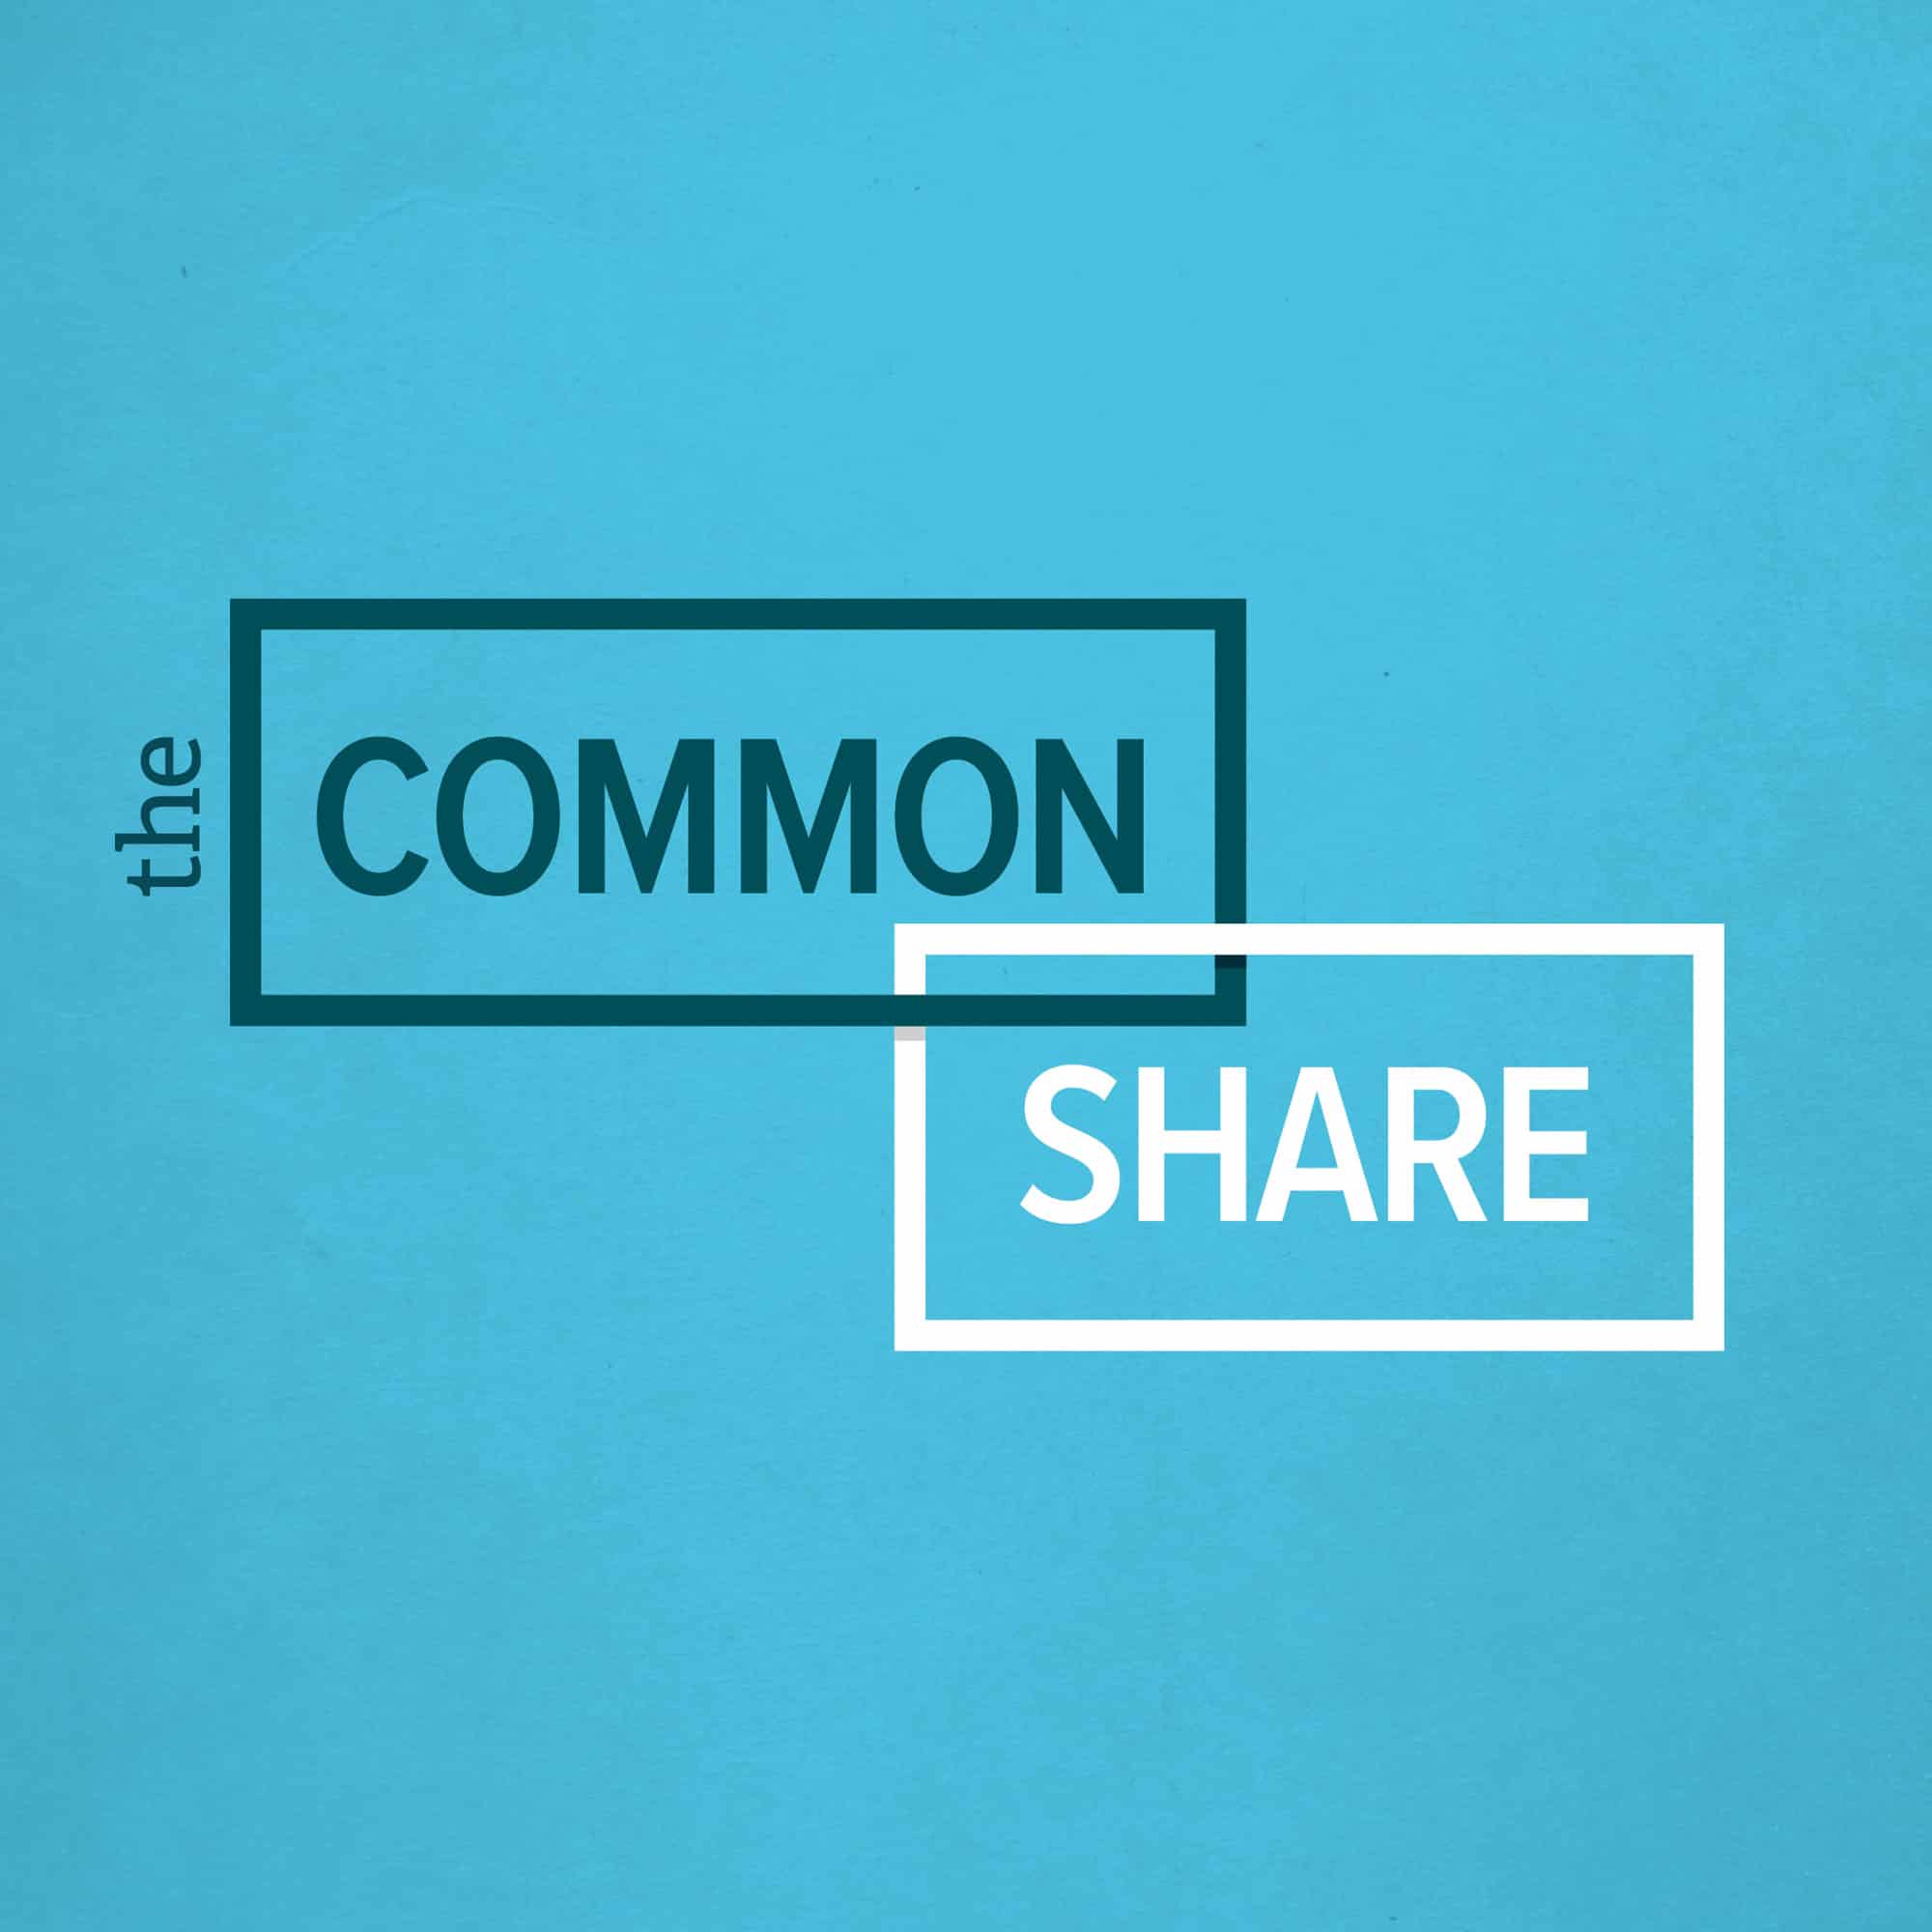 The common share